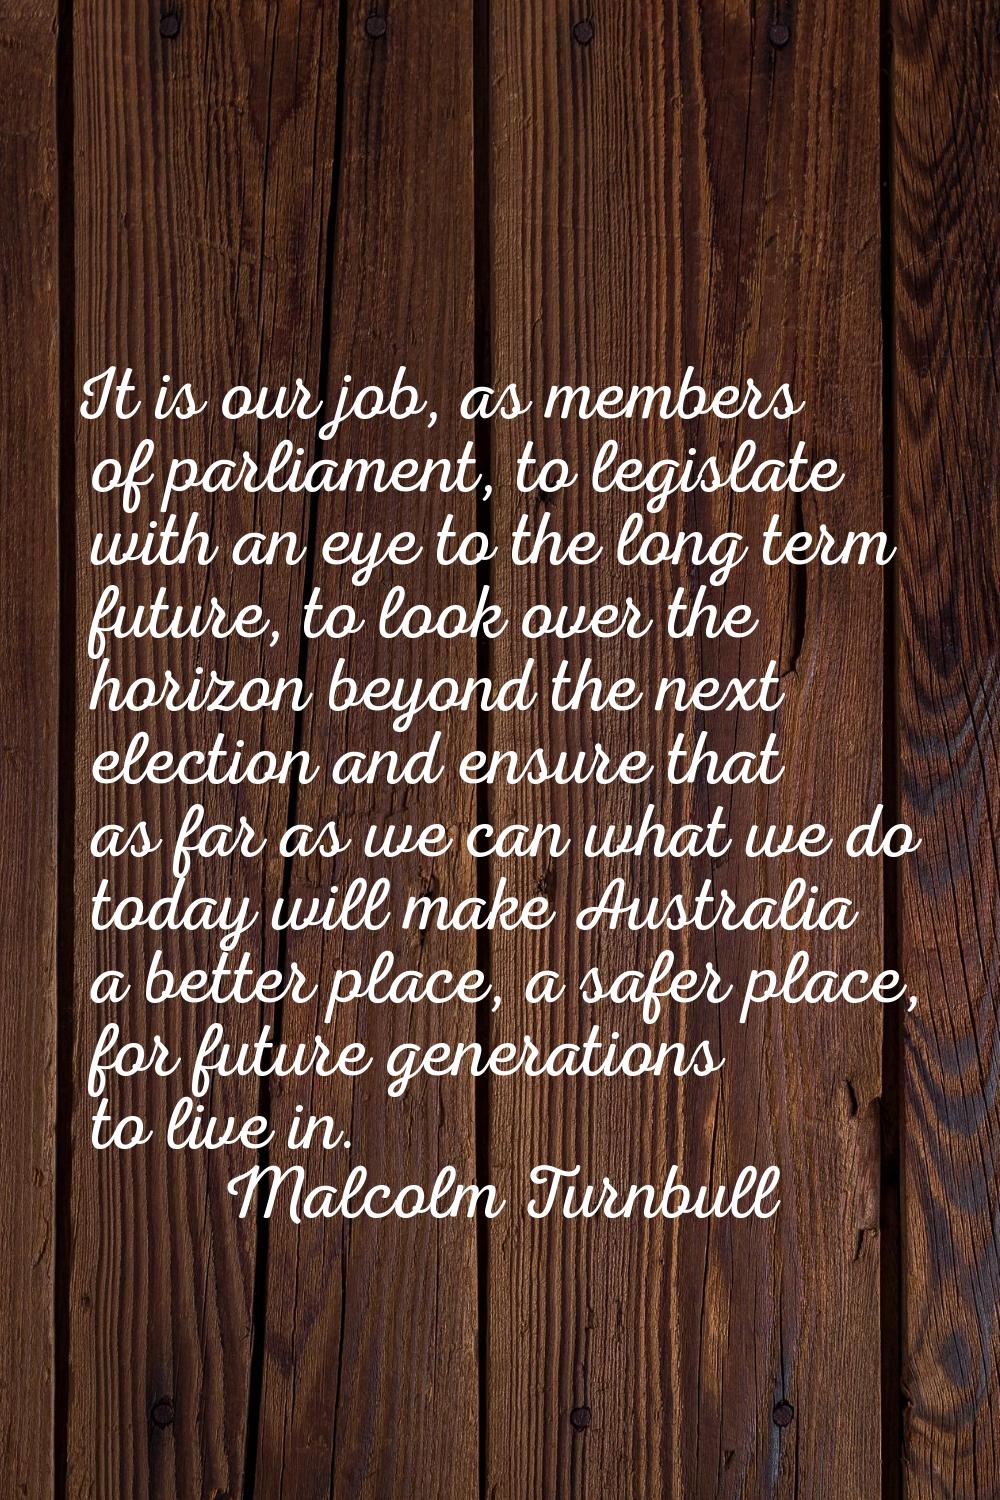 It is our job, as members of parliament, to legislate with an eye to the long term future, to look 